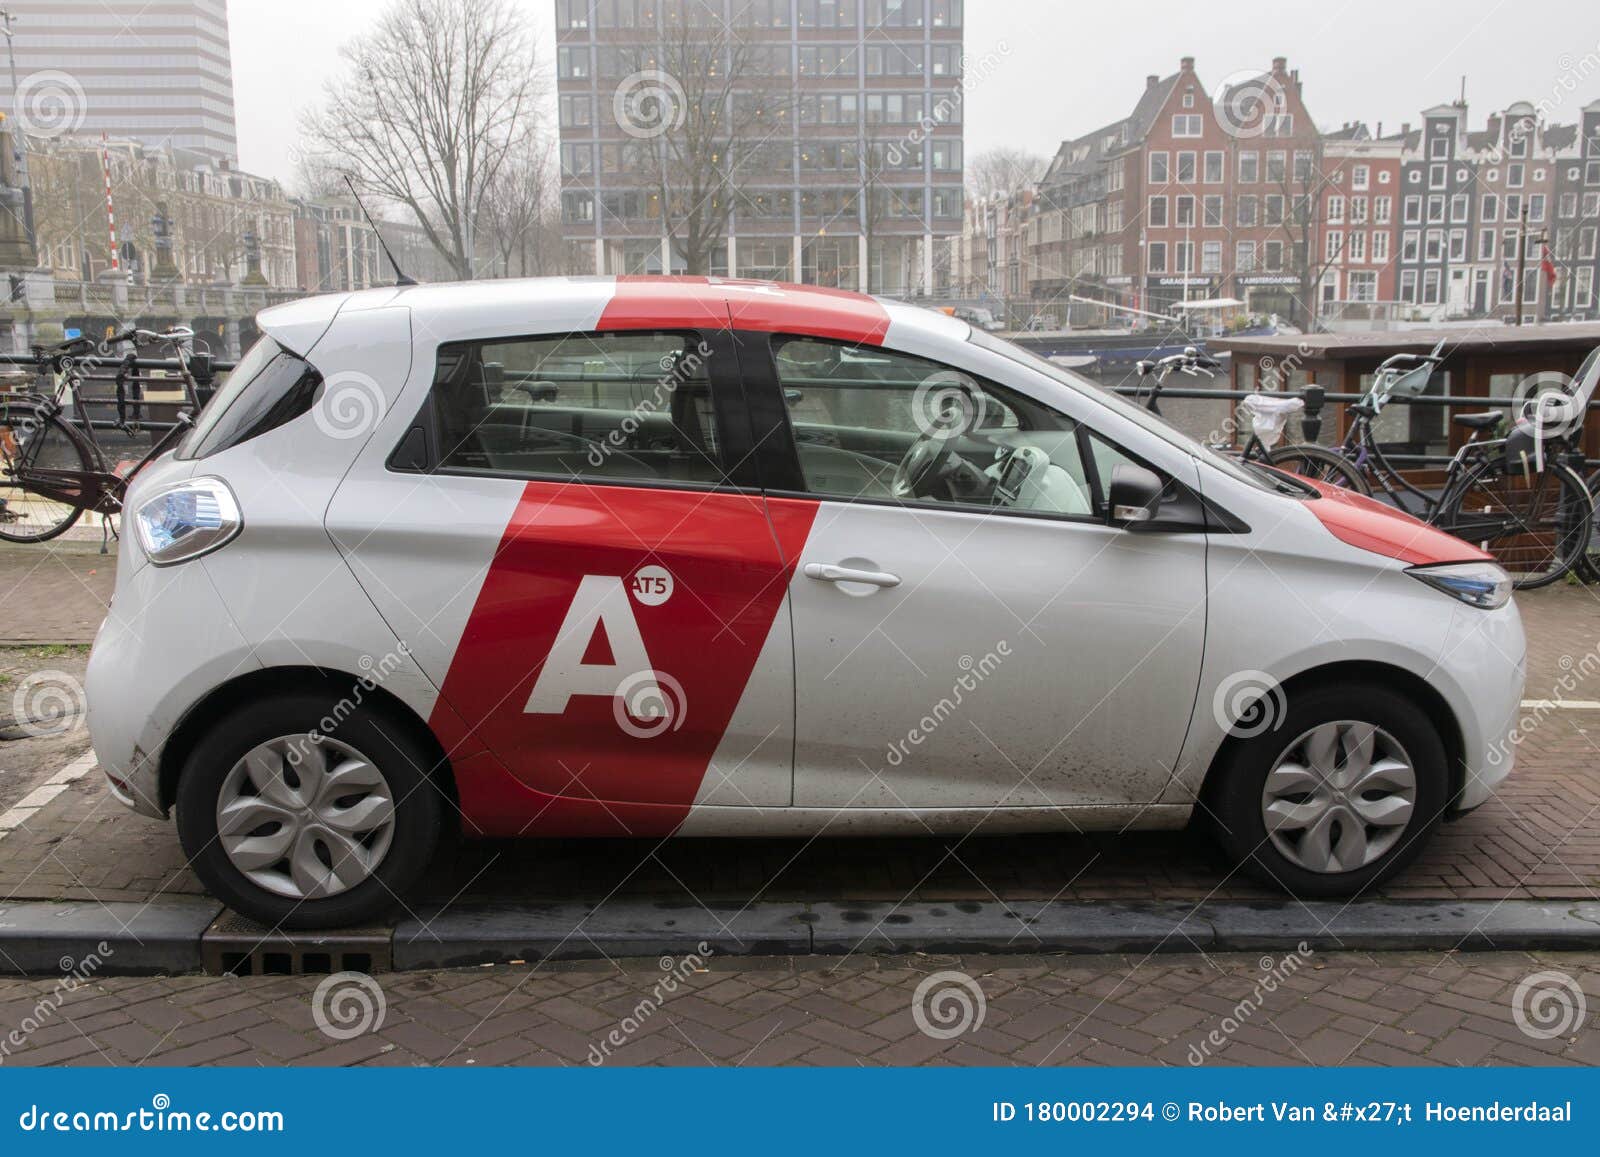 AT5 Company Car at Amsterdam the Netherlands 2020 Editorial Stock Image ...